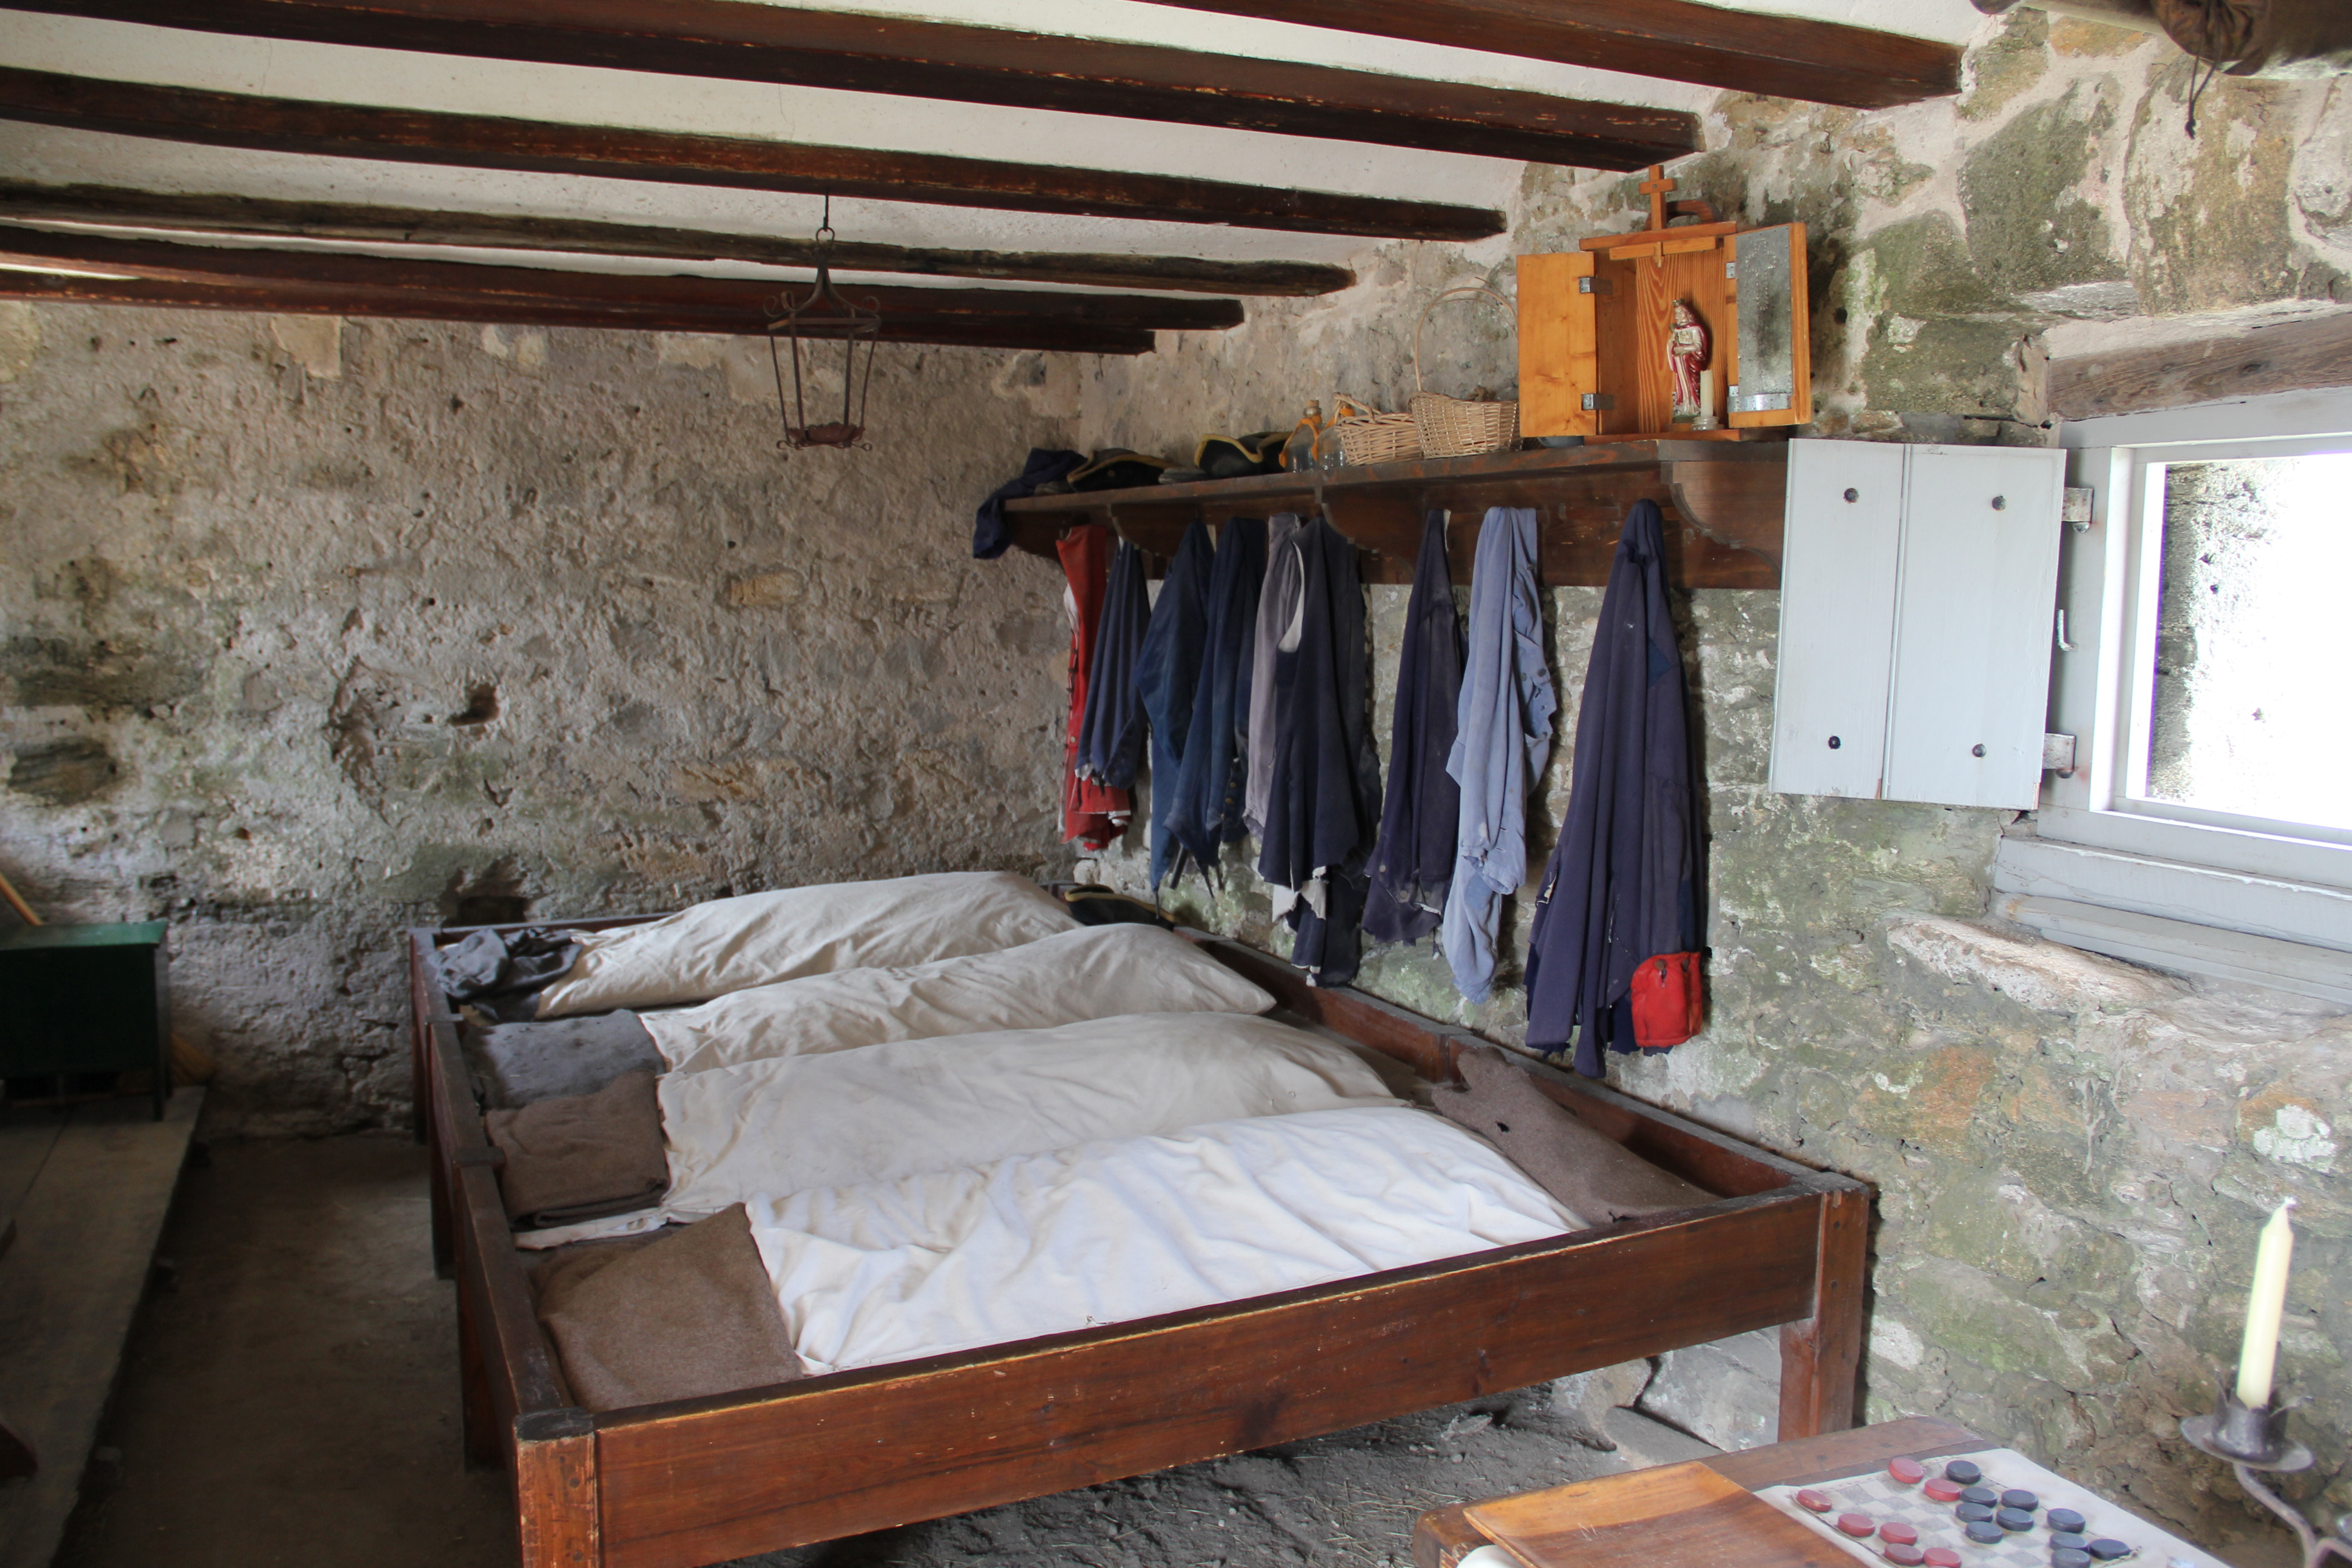 Wooden bunks and uniform items in the soldier's quarters.